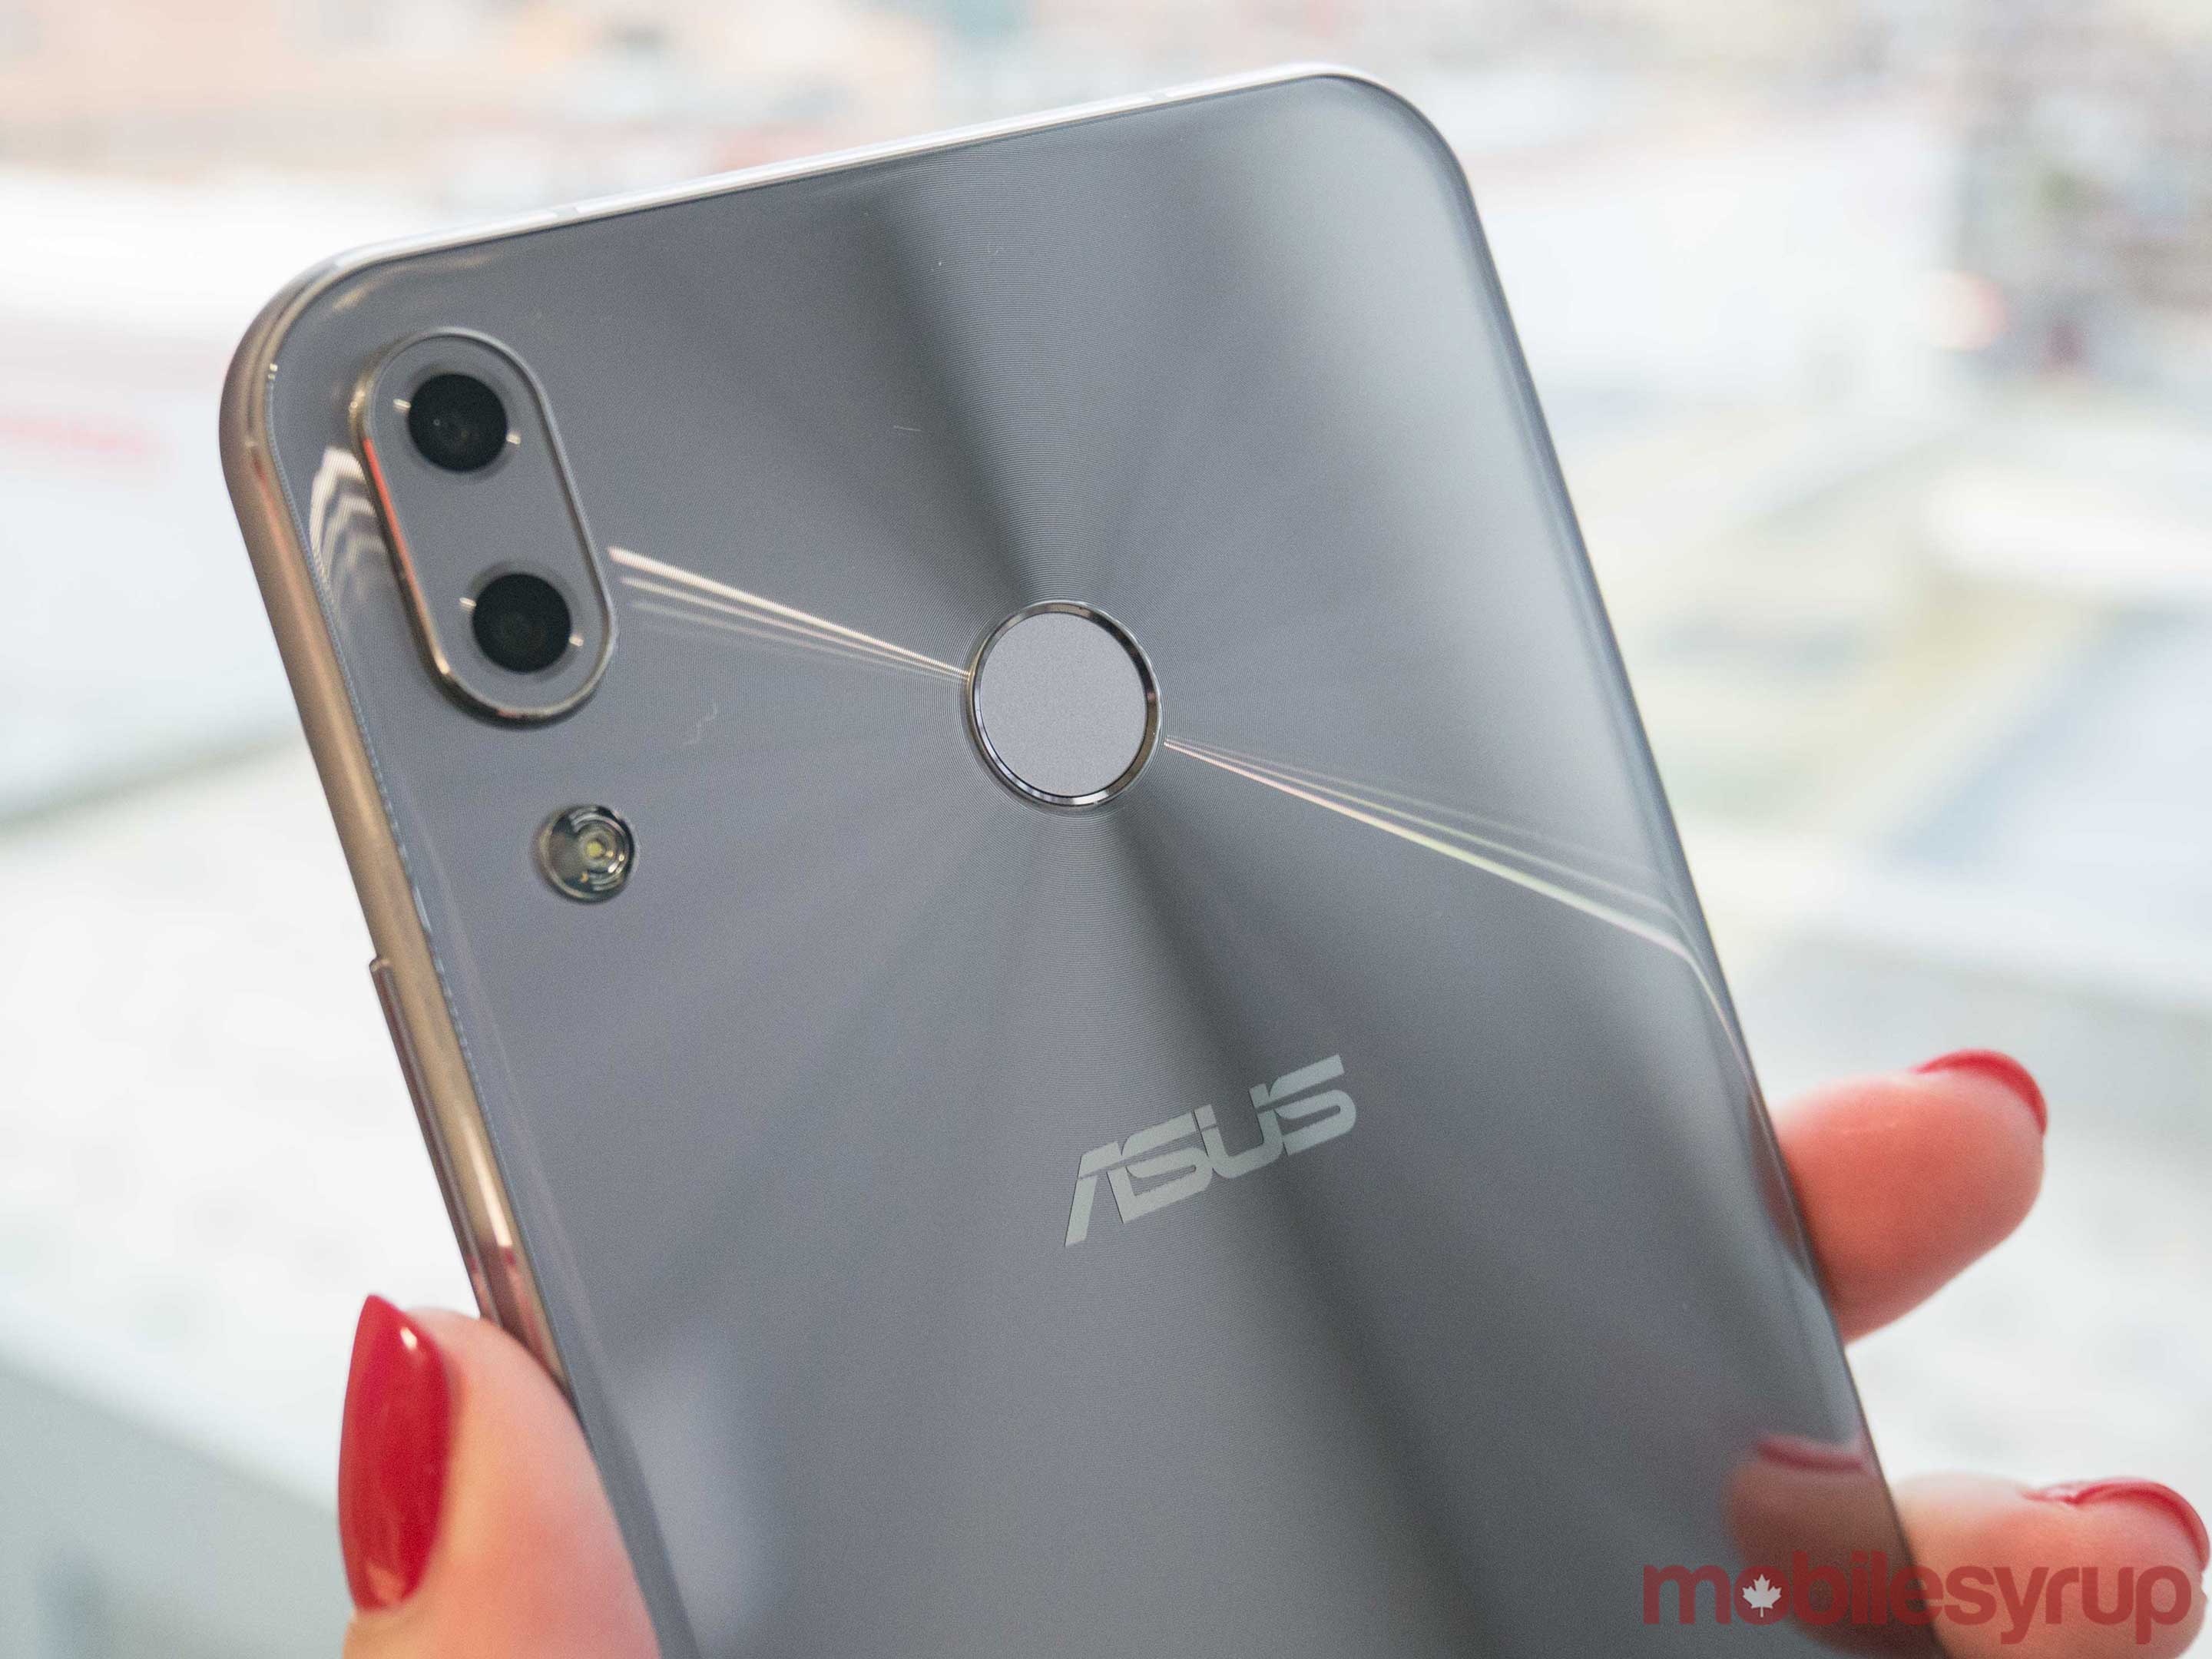 Asus' new ZenFone 5 lineup features impressive specs and ultra 